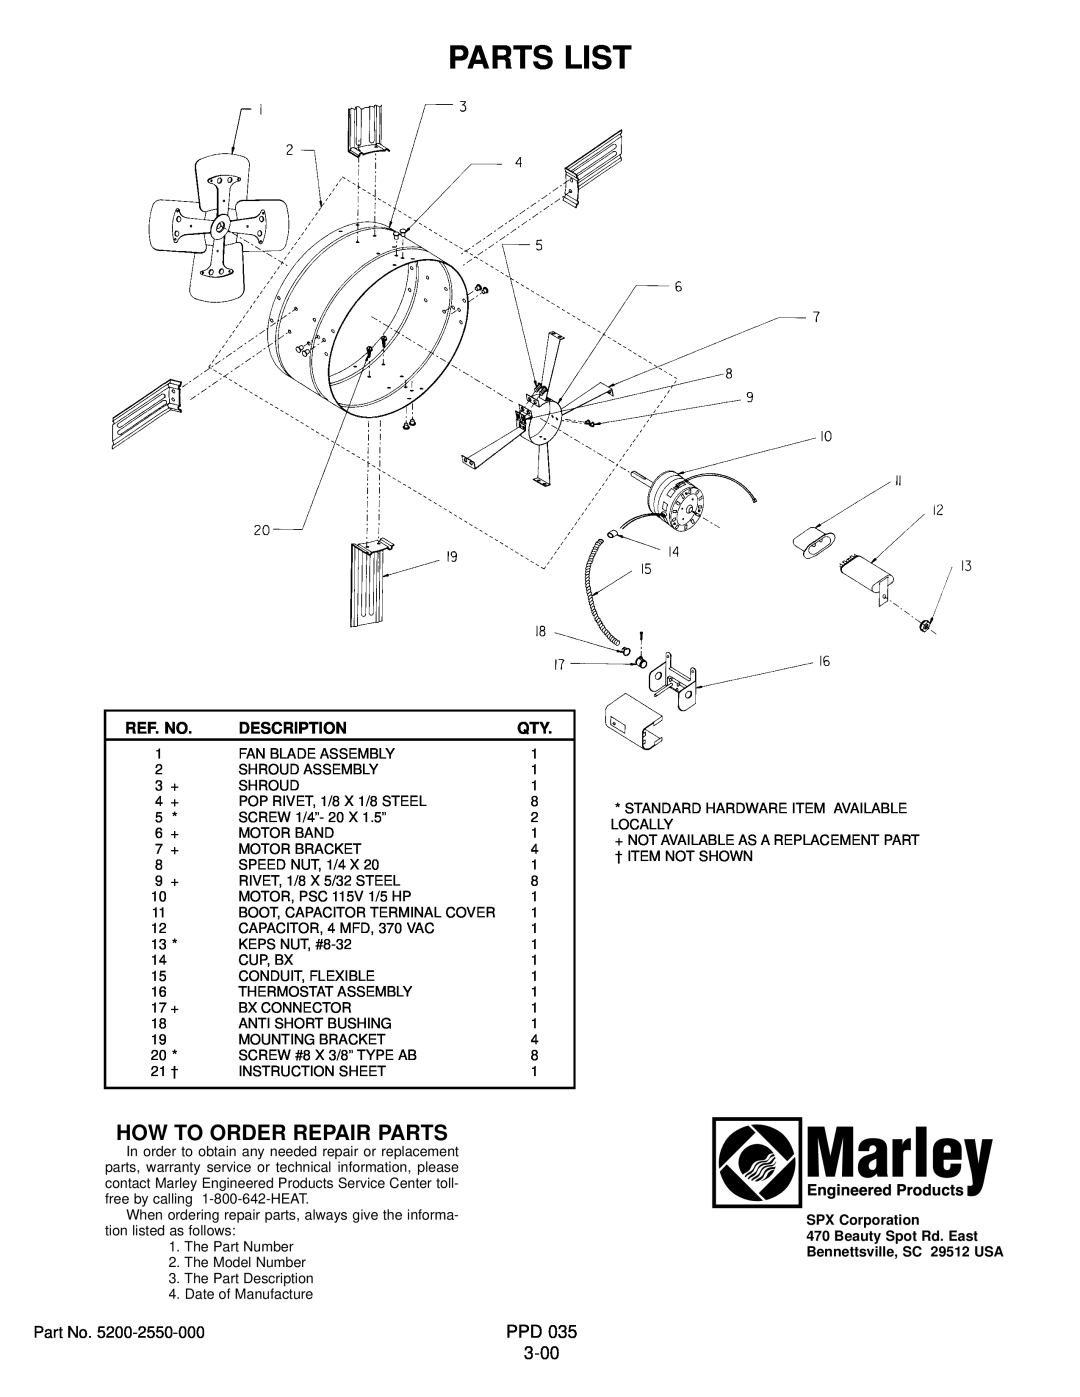 Marley Engineered Products GV 16 Parts List, How To Order Repair Parts, 3-00, SPX Corporation 470 Beauty Spot Rd. East 